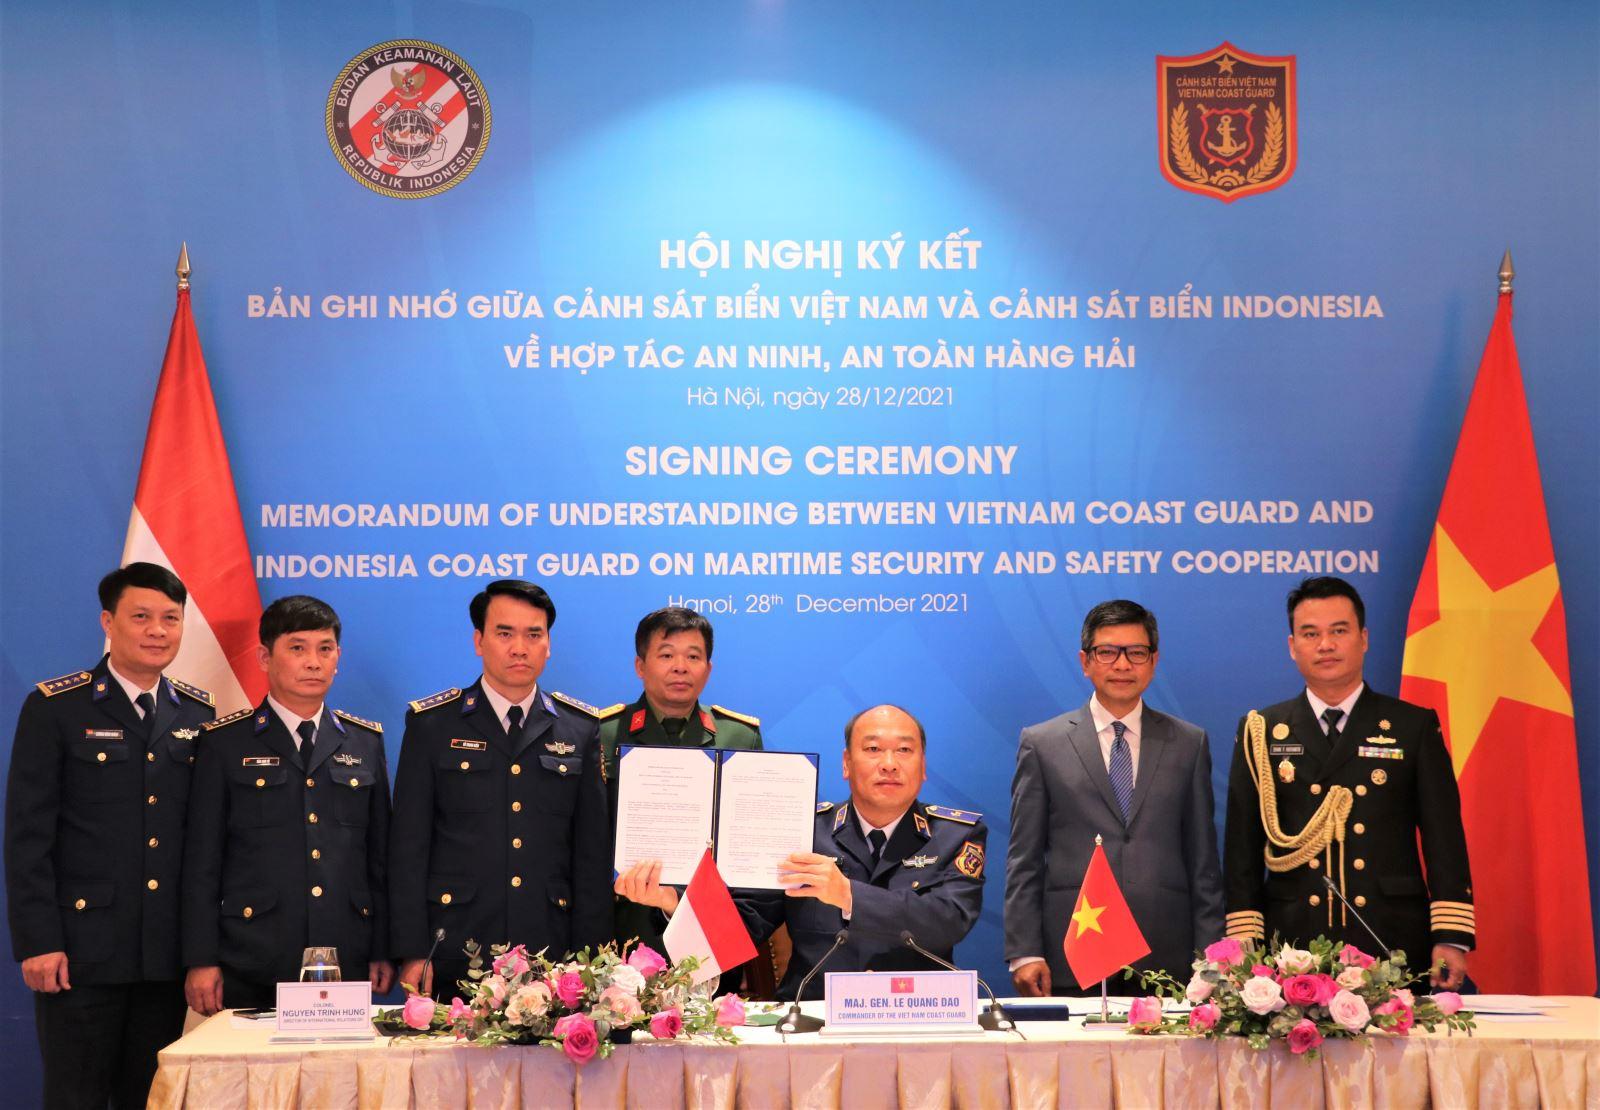 Commander of the Vietnam Coast Guard Major General Le Quang Dao holds up the signed MoU. (Photo: VNA)